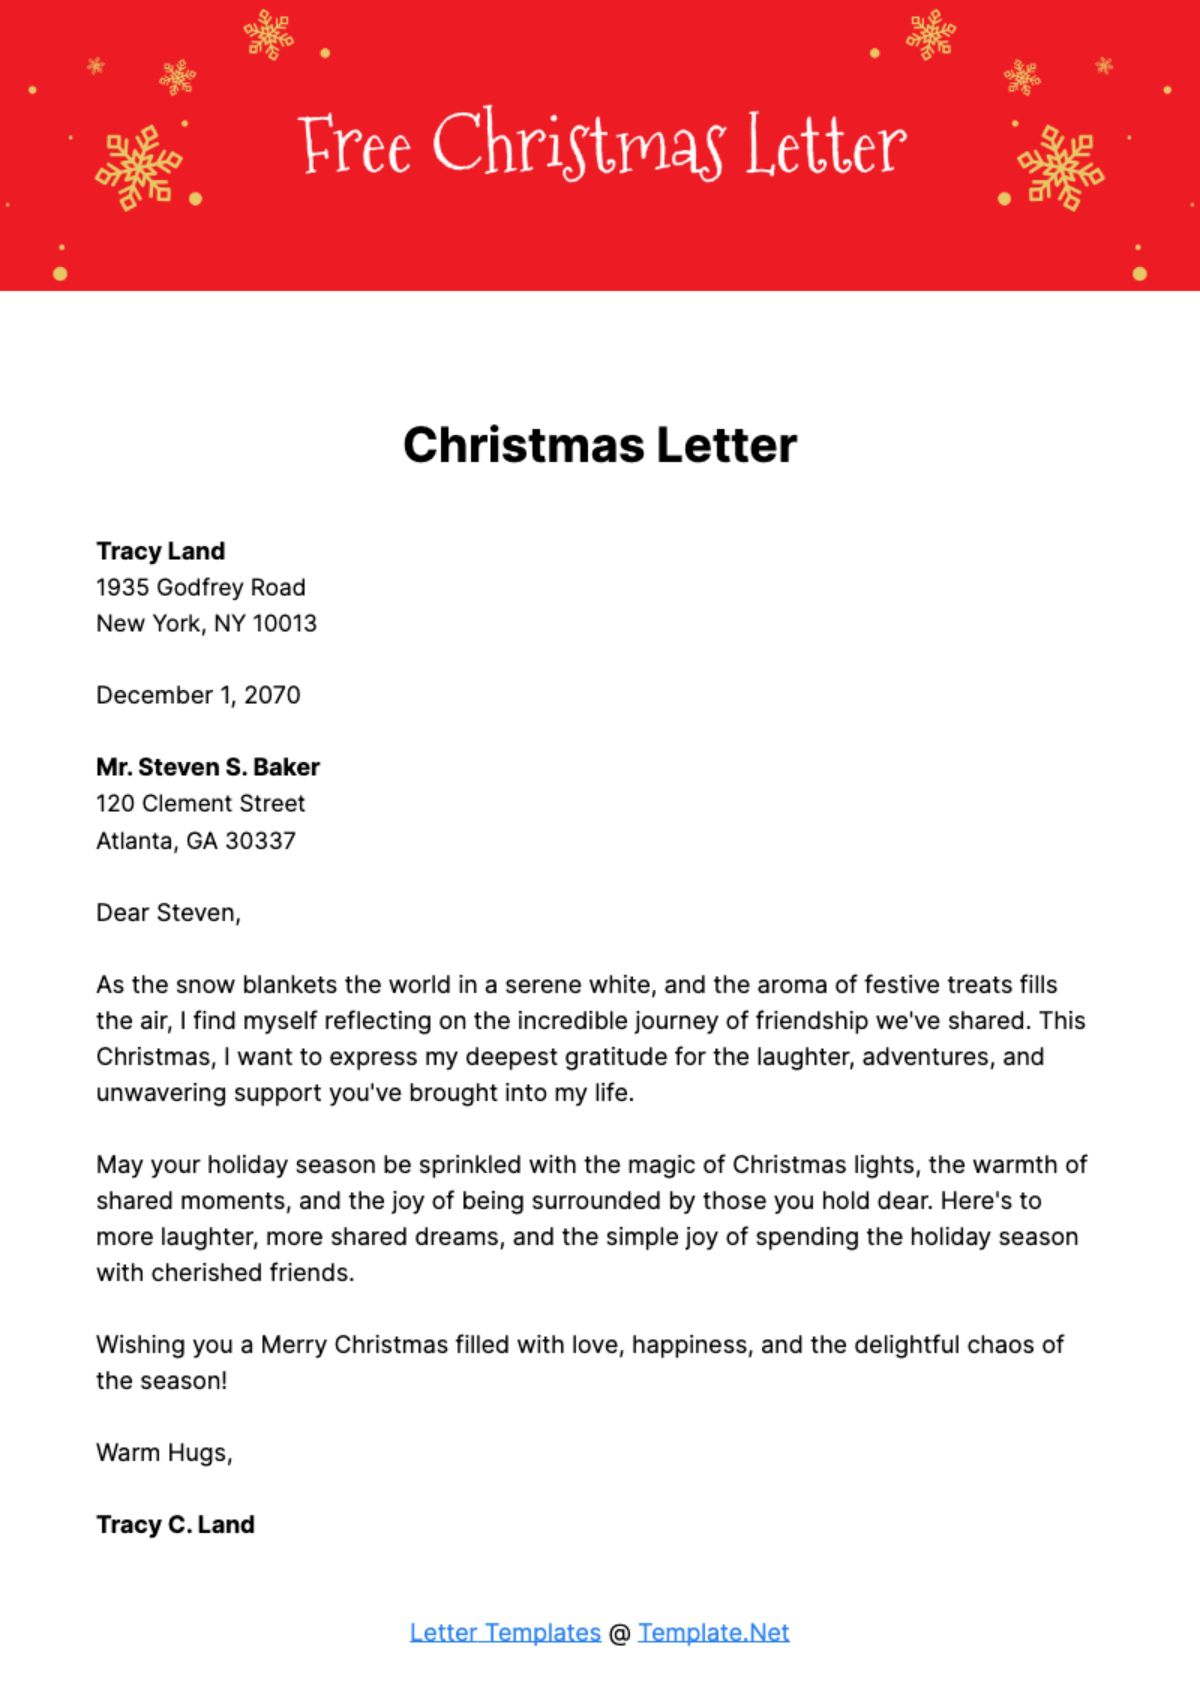 Free Christmas Letter Template